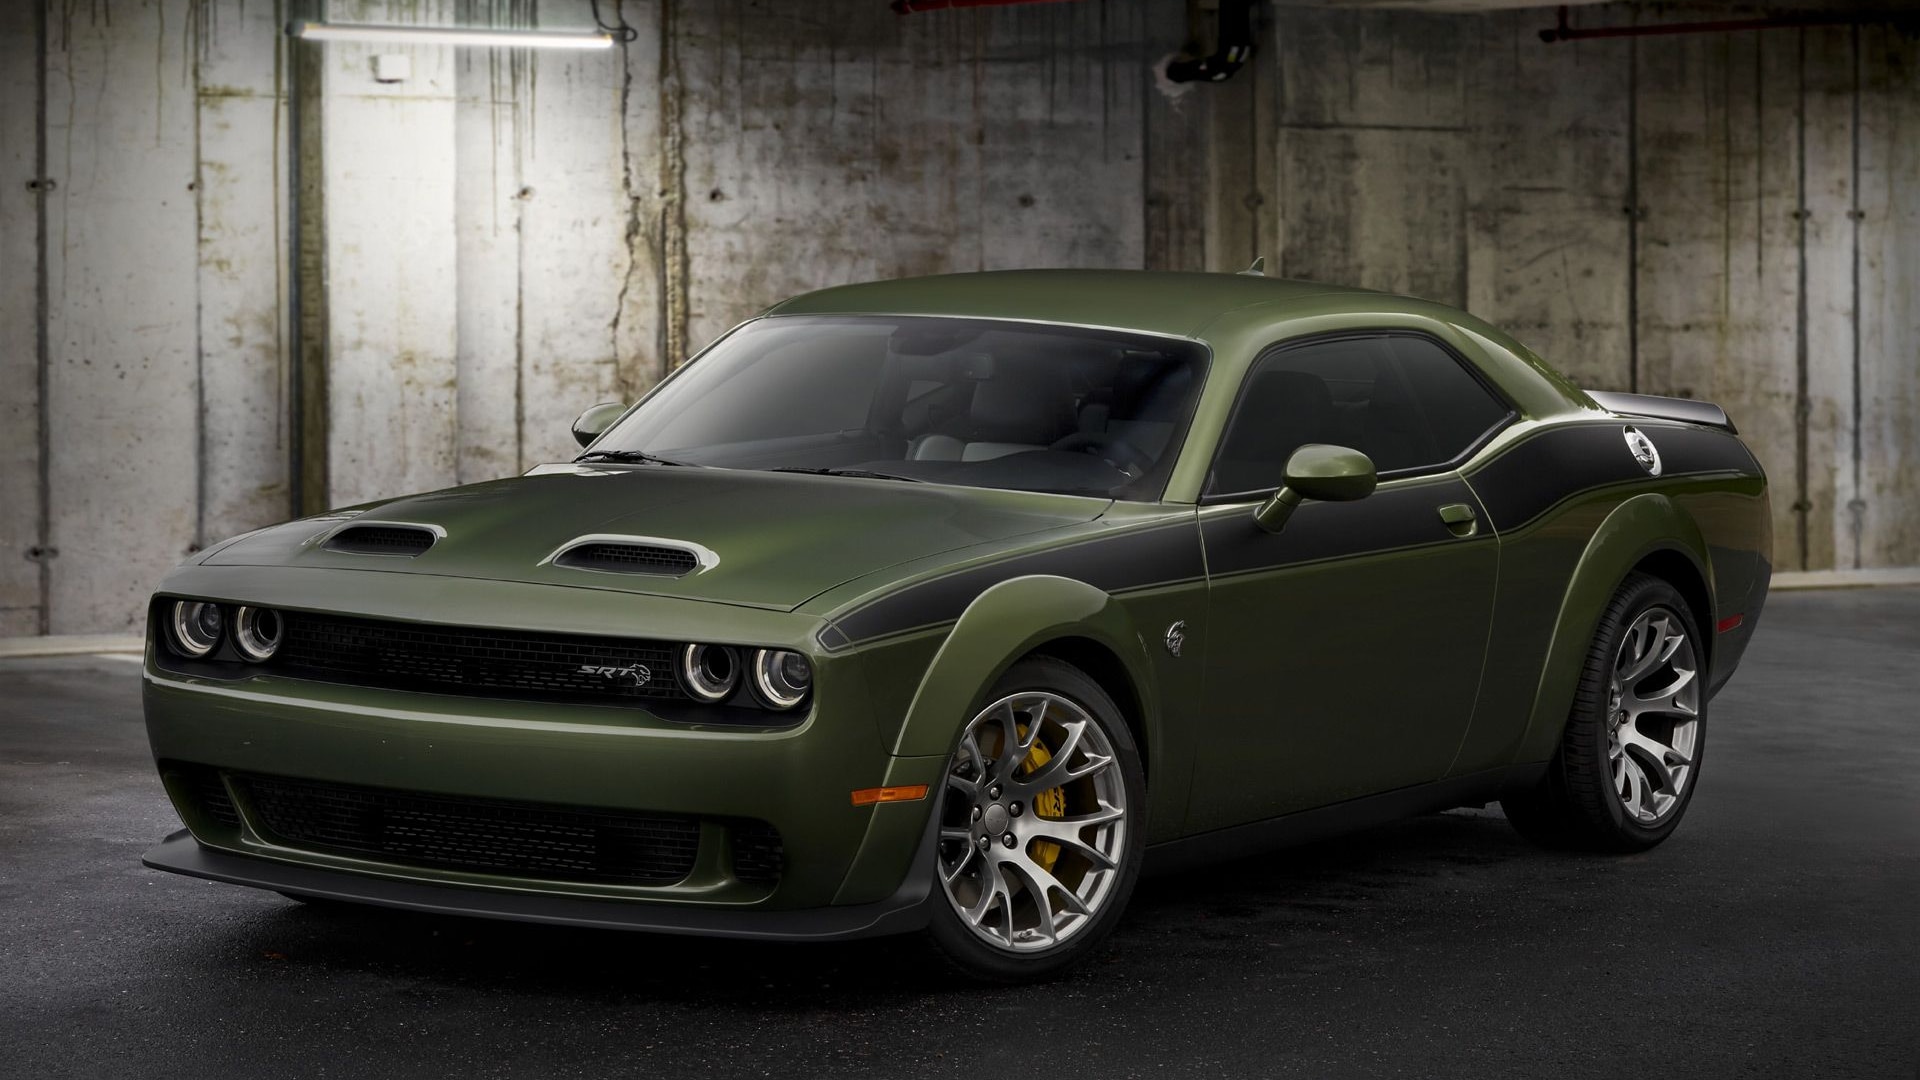 Dodge Direct Connection and Jay Leno's Garage Team Up to Offer New